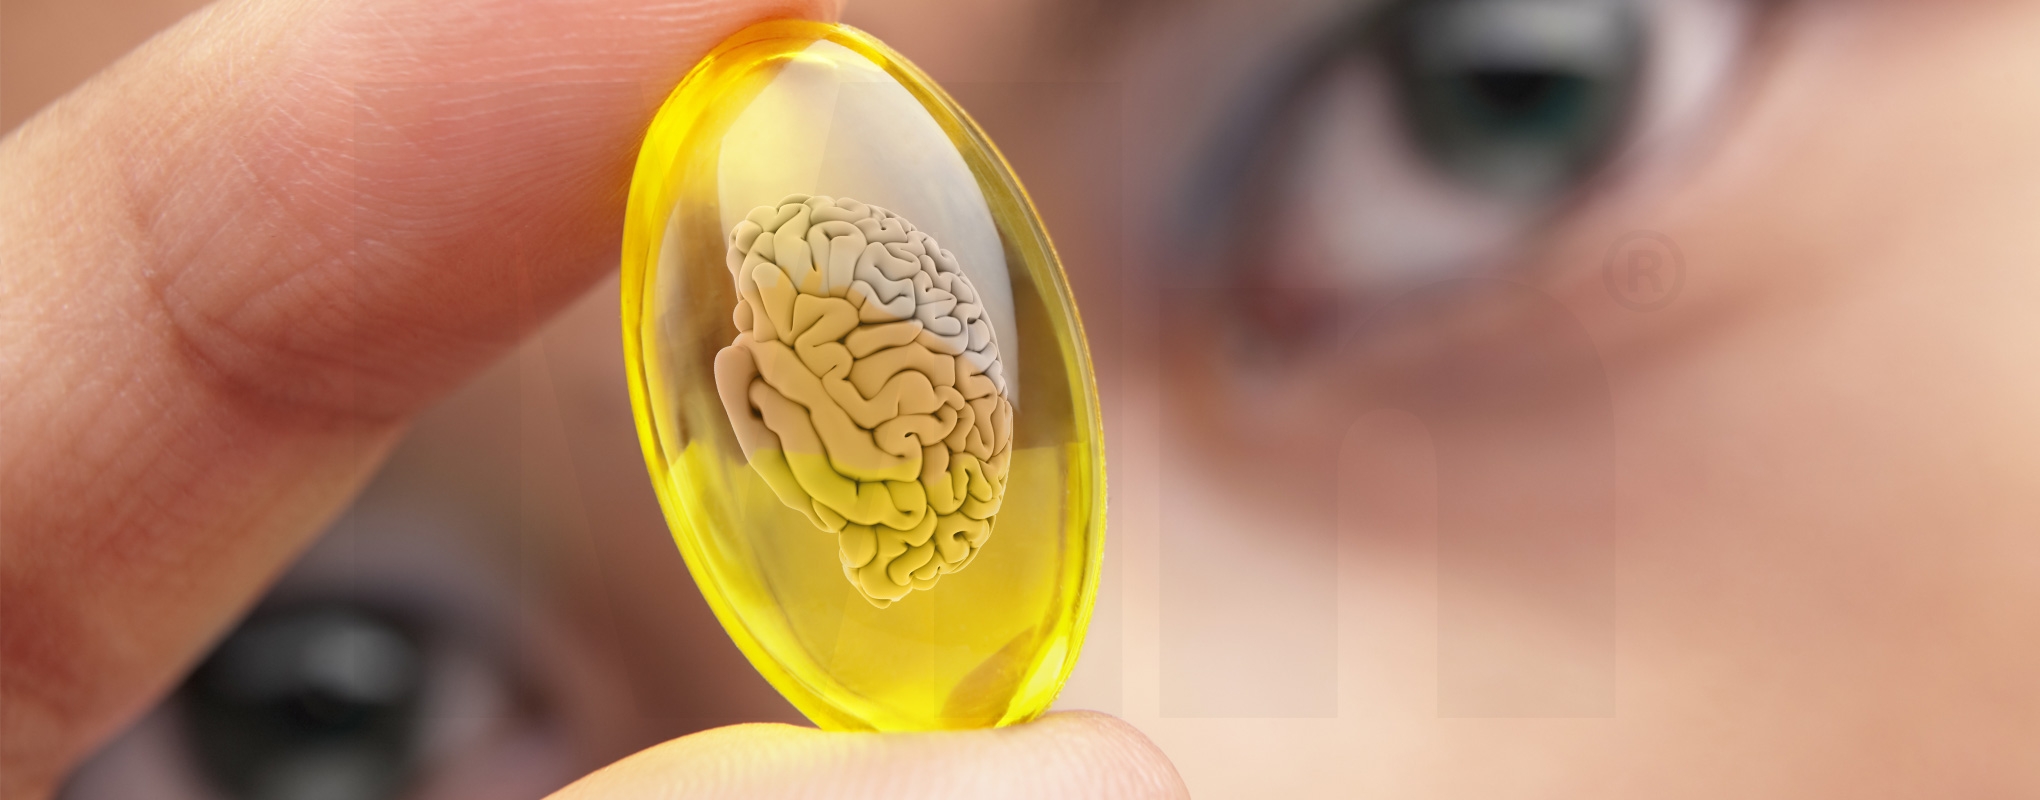 The Effects of Long-Term Nootropic Use